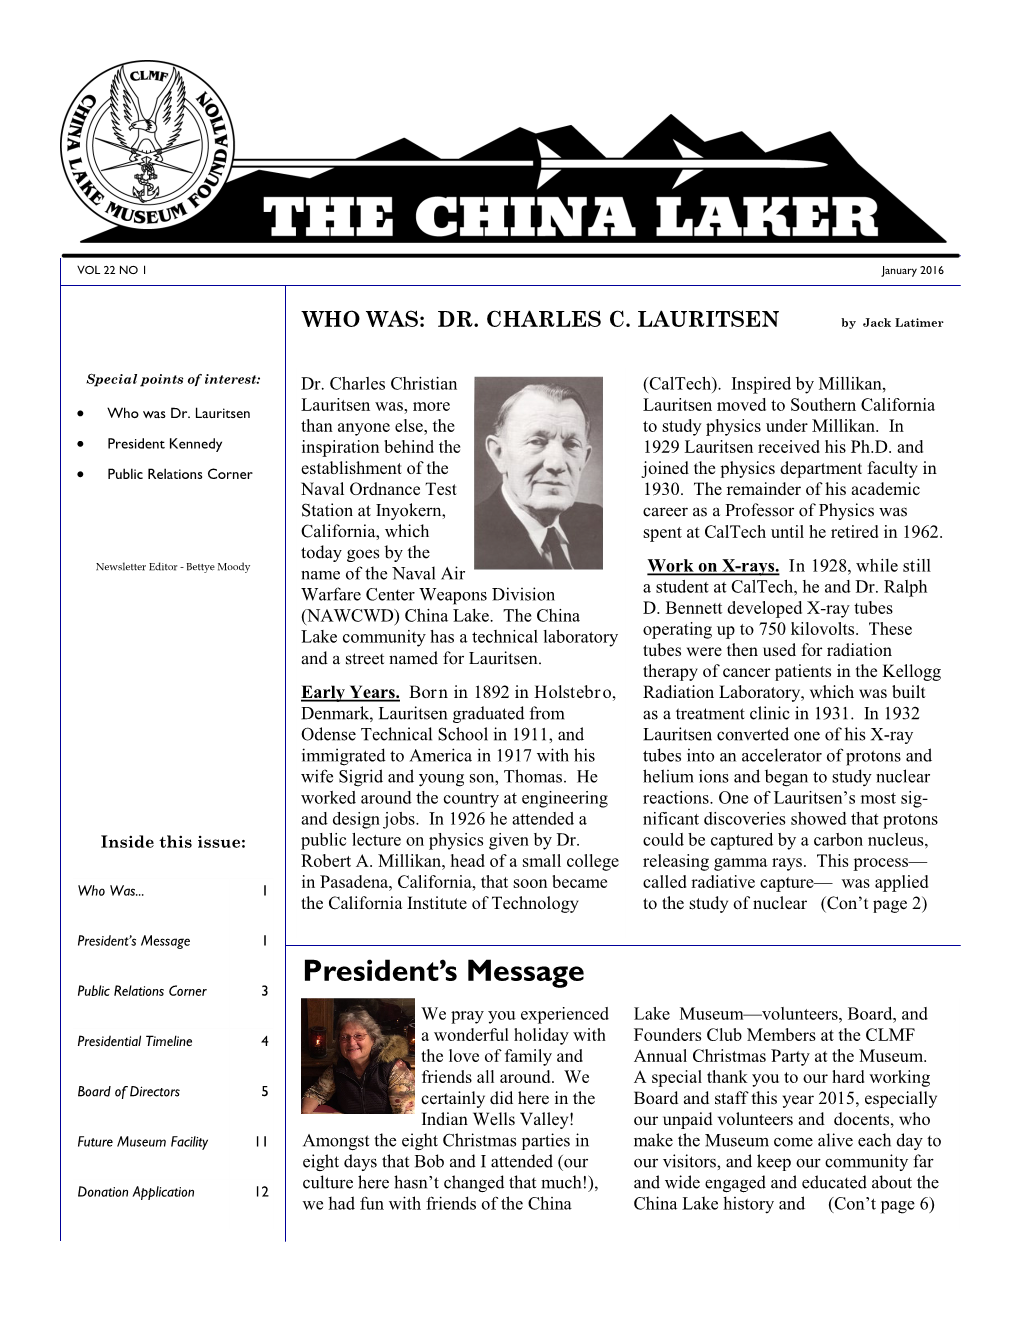 THE CHINA LAKER President's Message